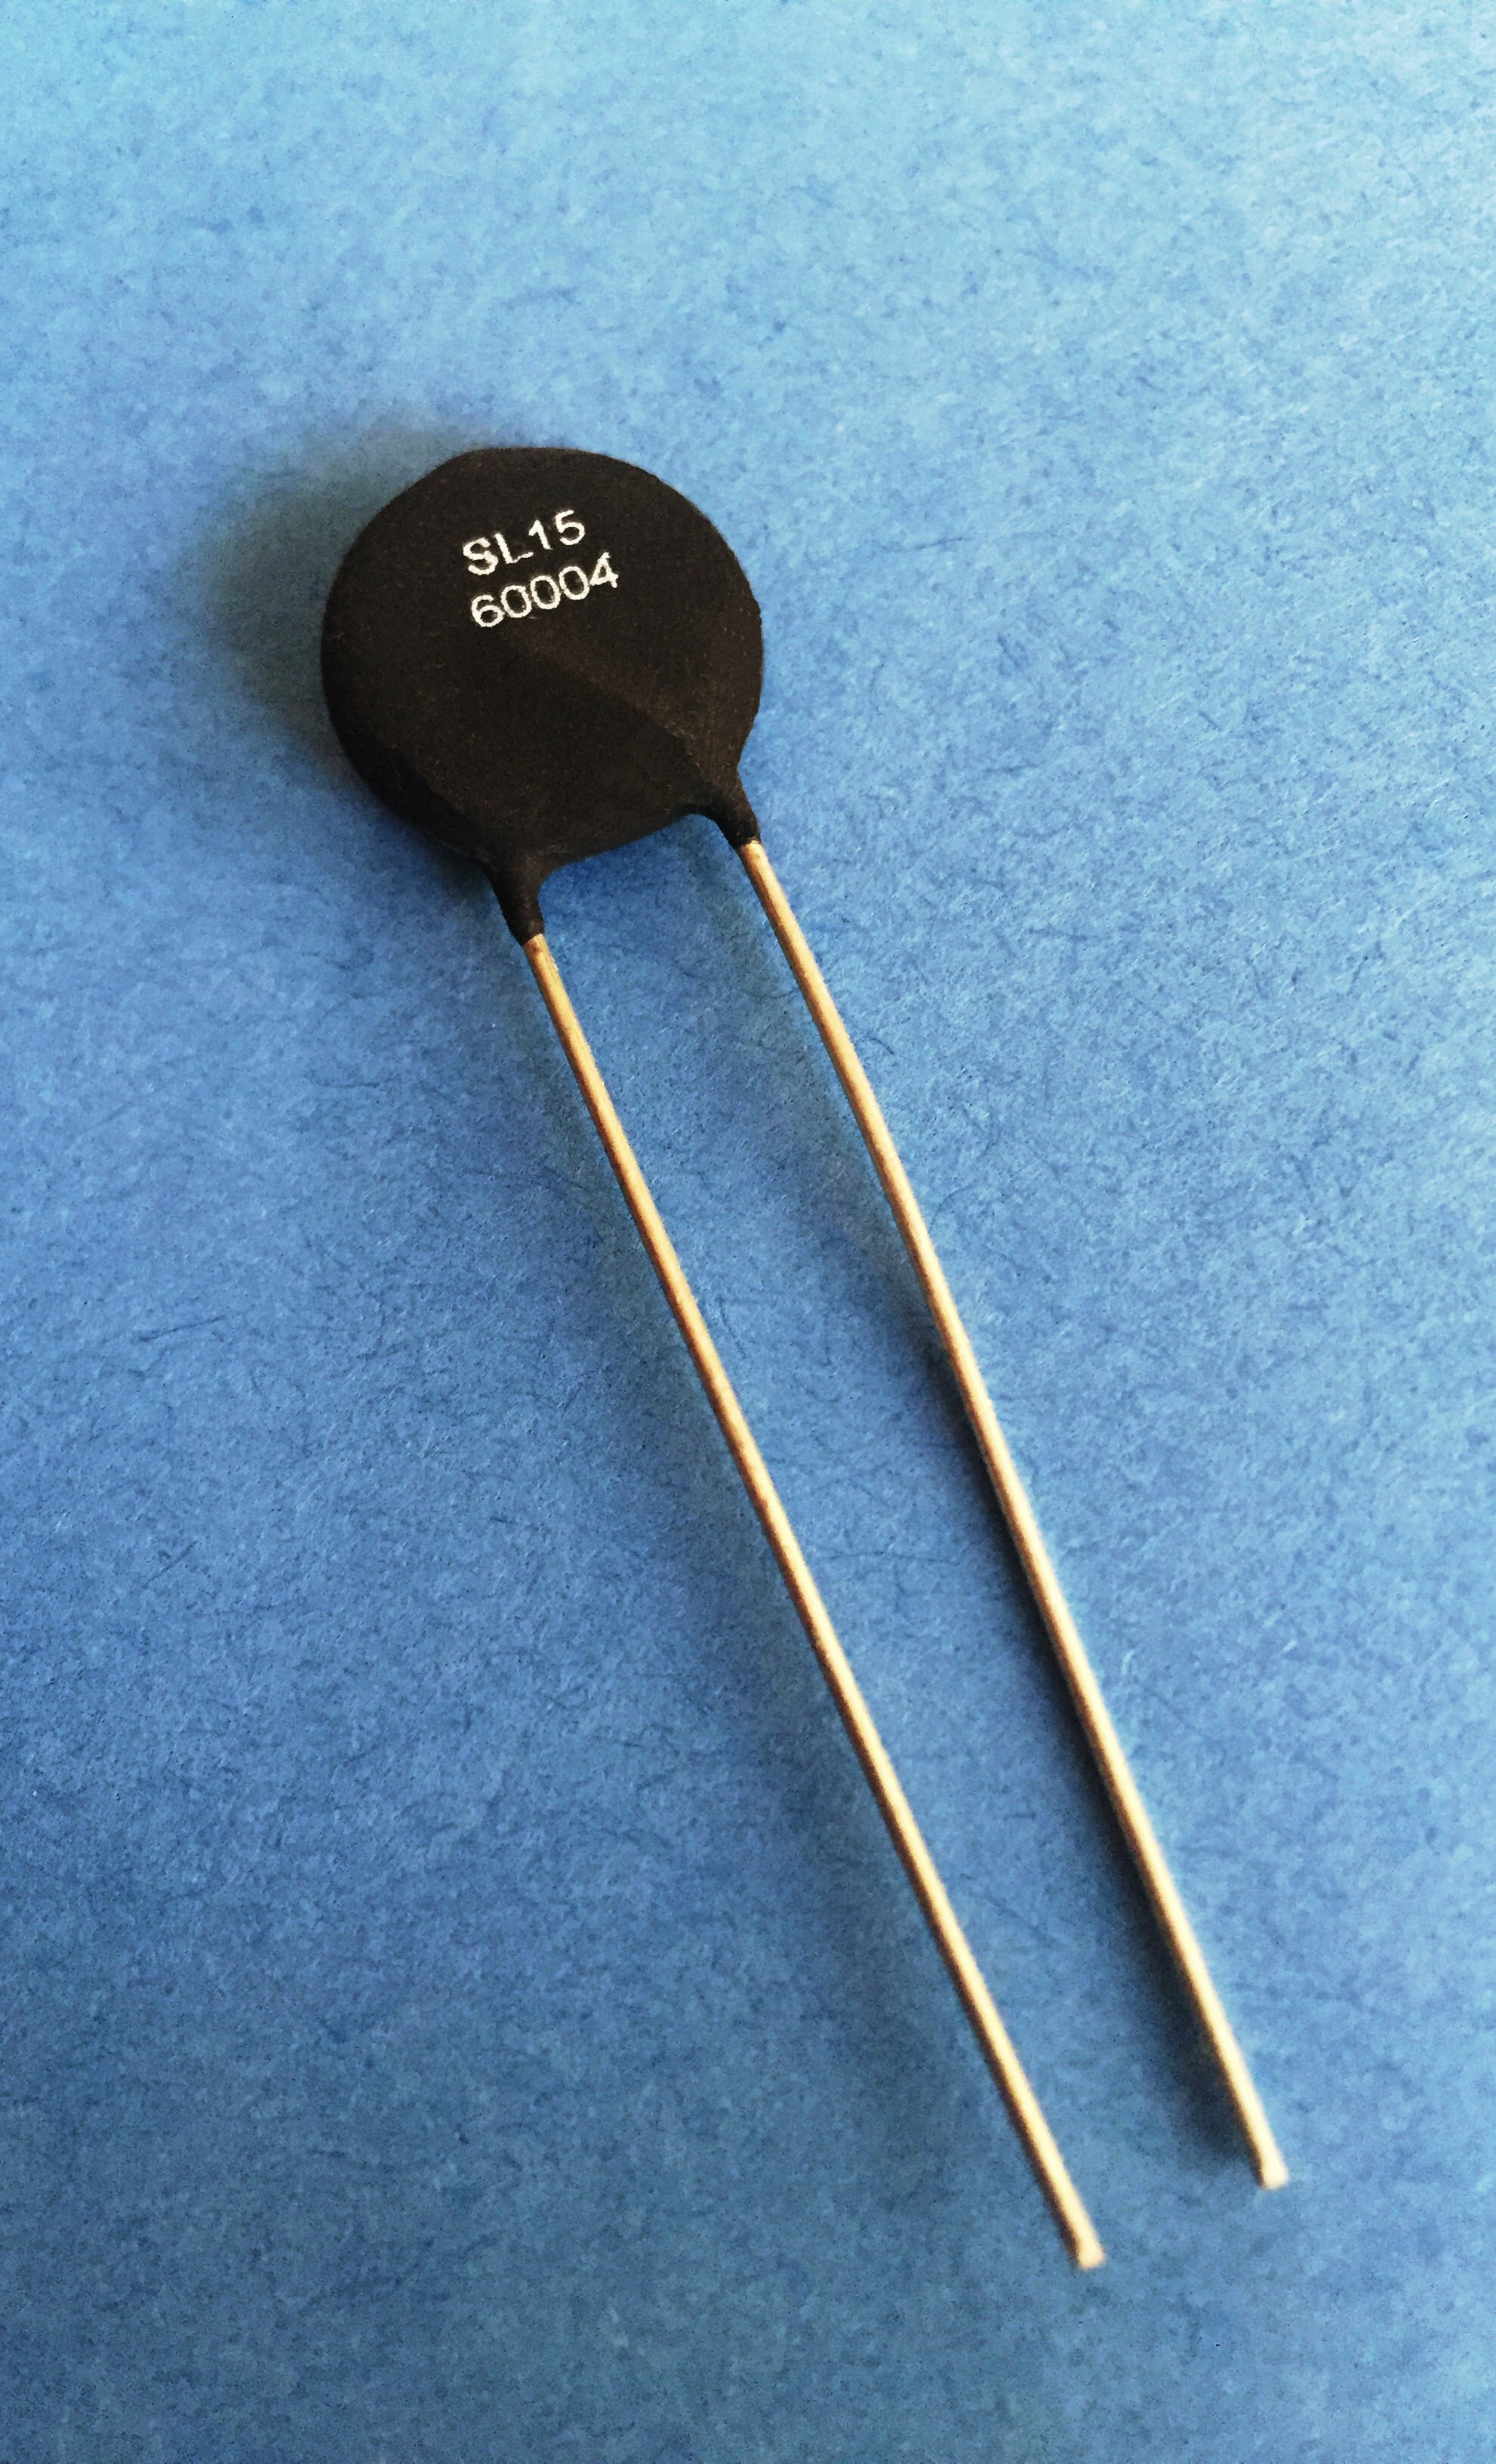 Thermistor With Compact 15-mm Diameter Delivers High Current to 4.0 A and Energy Ratings to 50 J